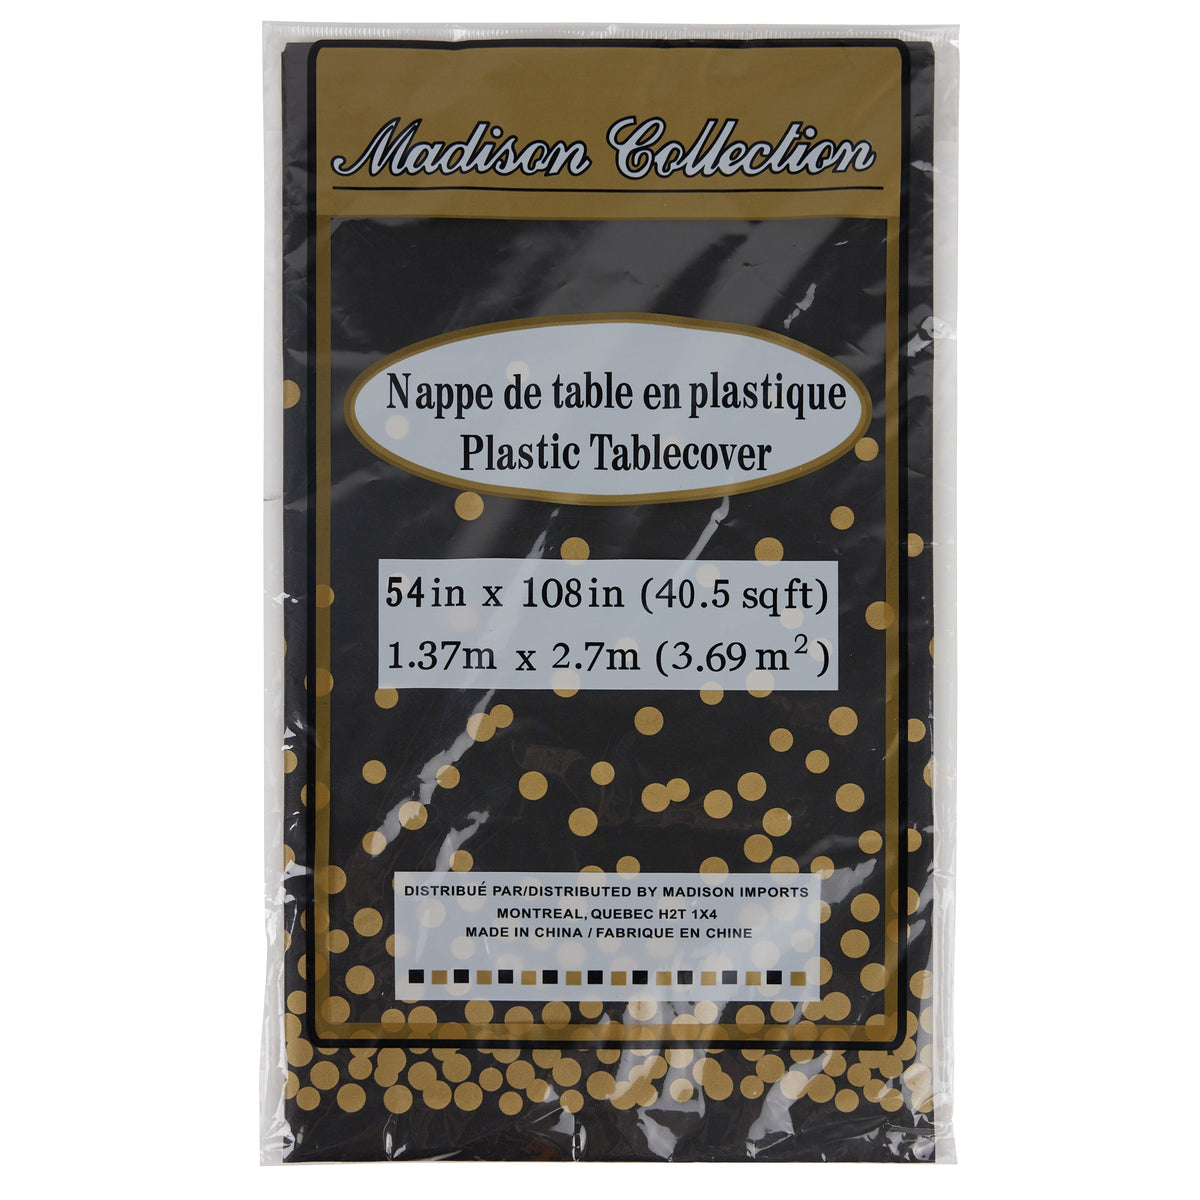 MADISON IMPORTS Disposable-Plasticware Black and Gold Plastic Table Cover, 54 x 108 Inches, 1 Count 775301479821